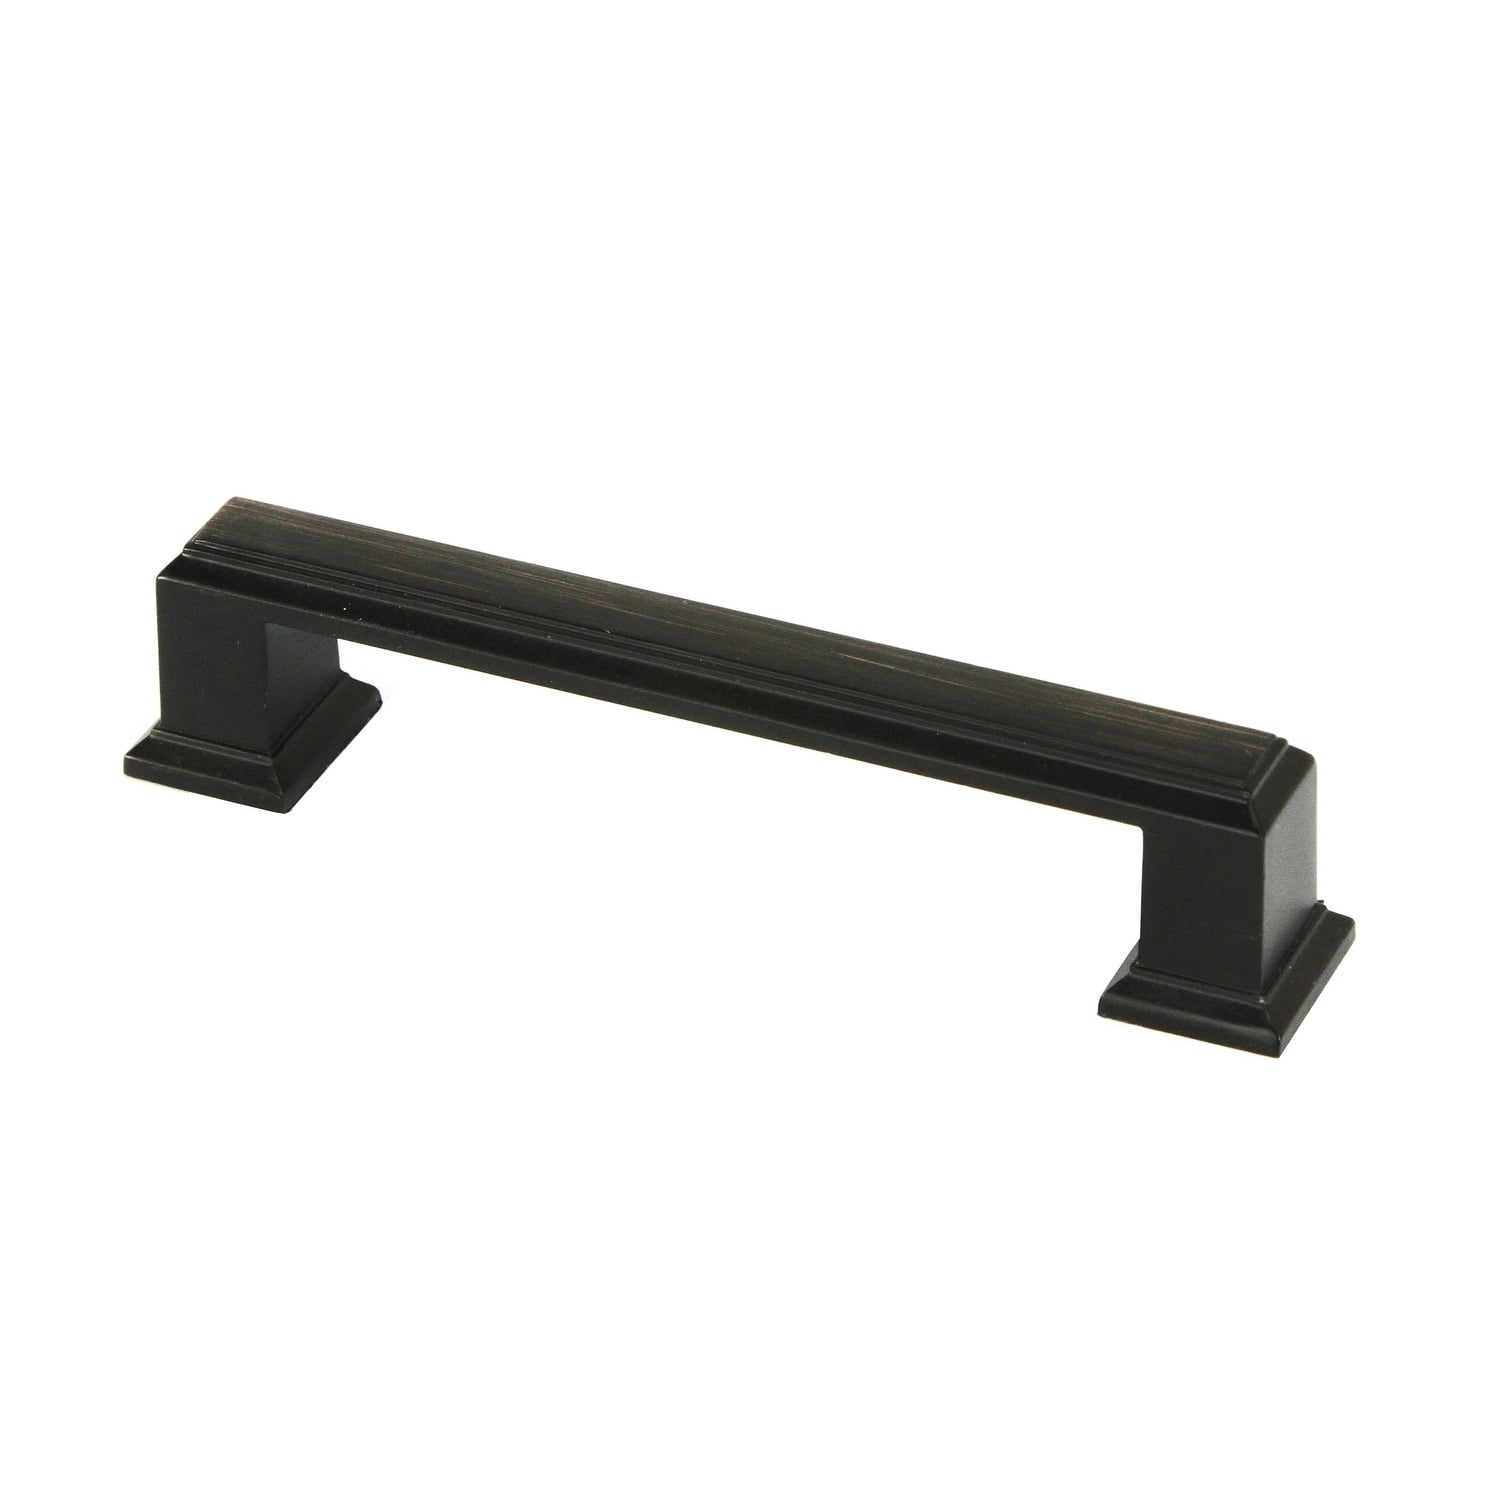 Cabinet Hardware Appliance Pulls pt43 Brushed Oil Rubbed Bronze handle 12" cc 